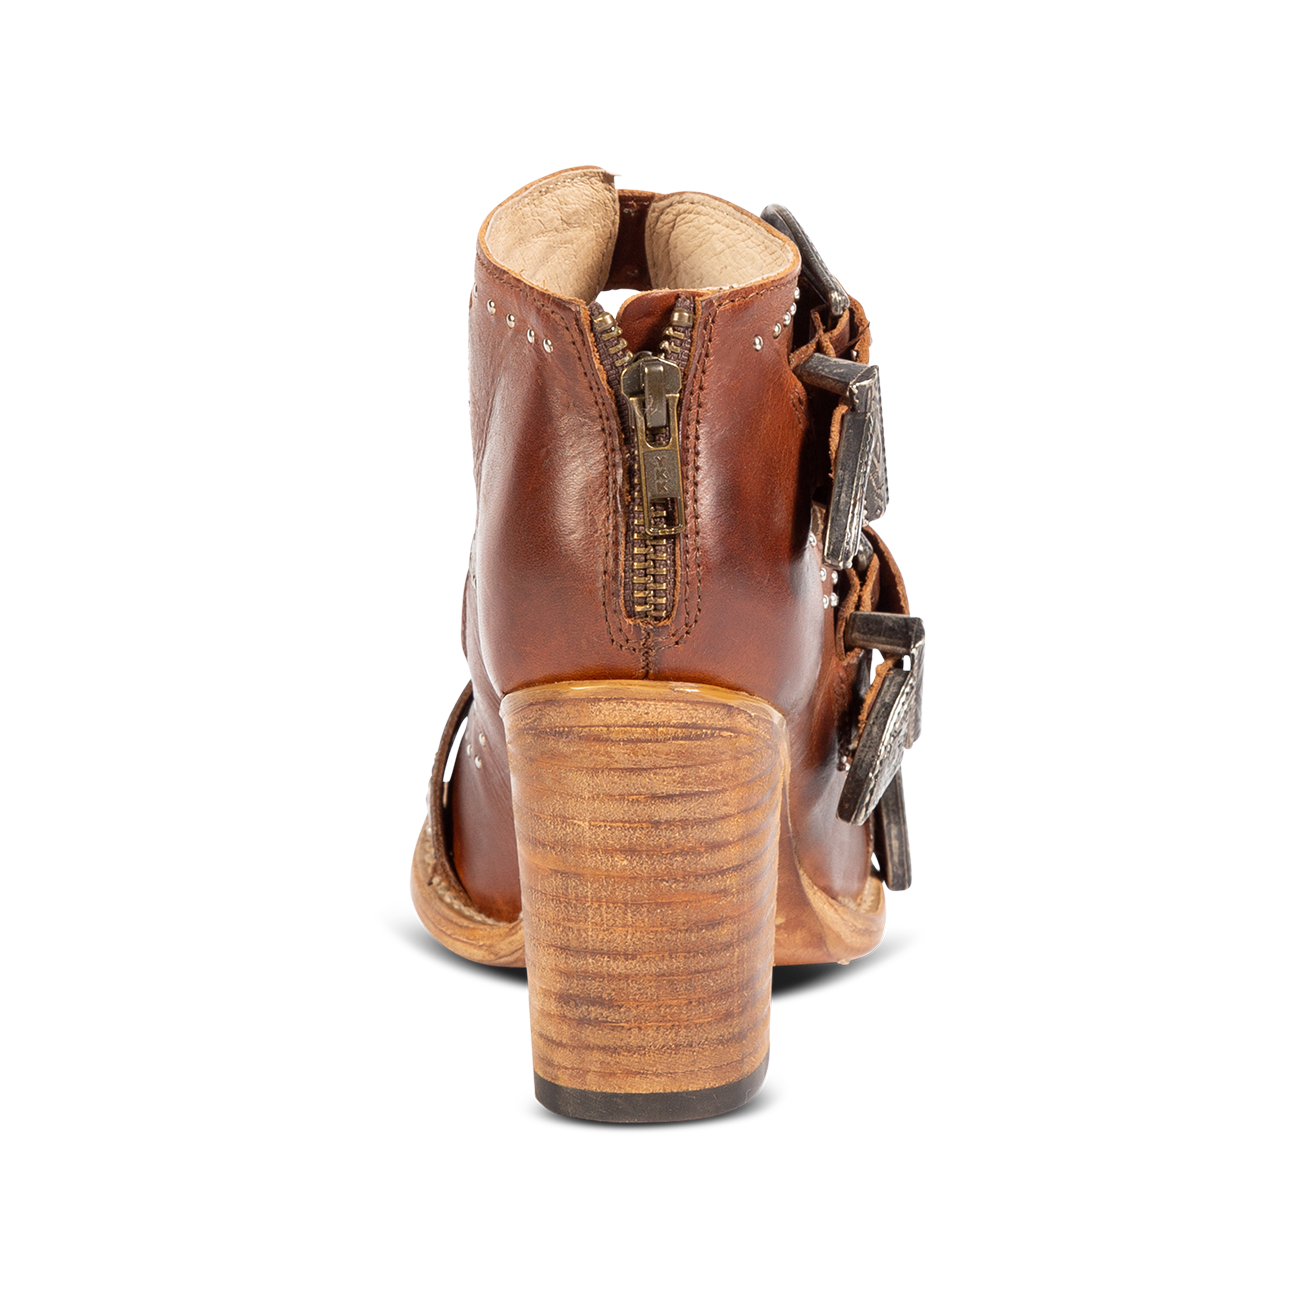 Back view showing working brass zip closure and leather heel on FREEBIRD women's Violet cognac sandal